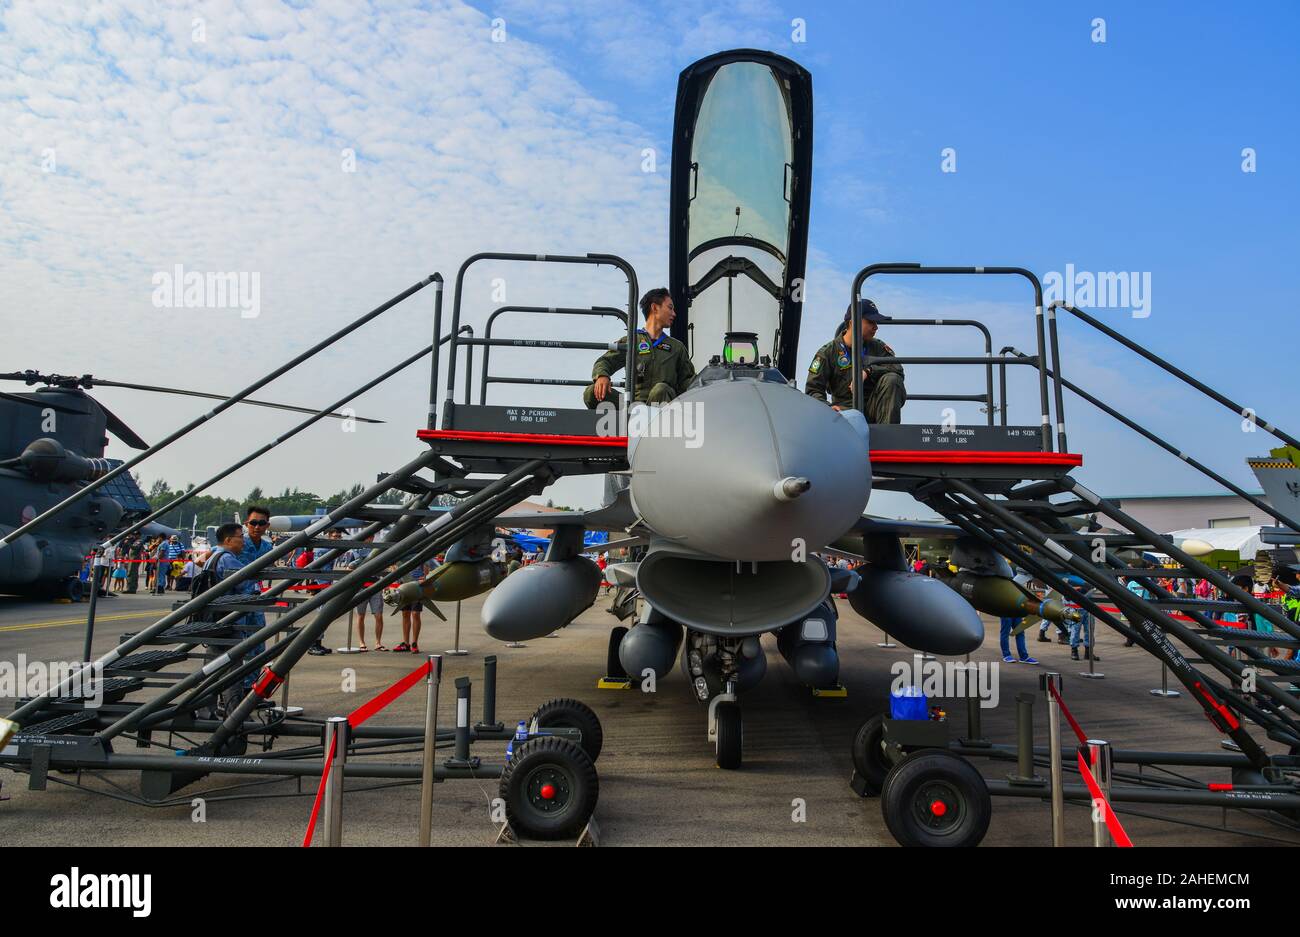 Singapore - Feb 10, 2018. A General Dynamics F-16 Fighting Falcon aircraft belong to the Singapore Air Force on display in Changi, Singapore. Stock Photo